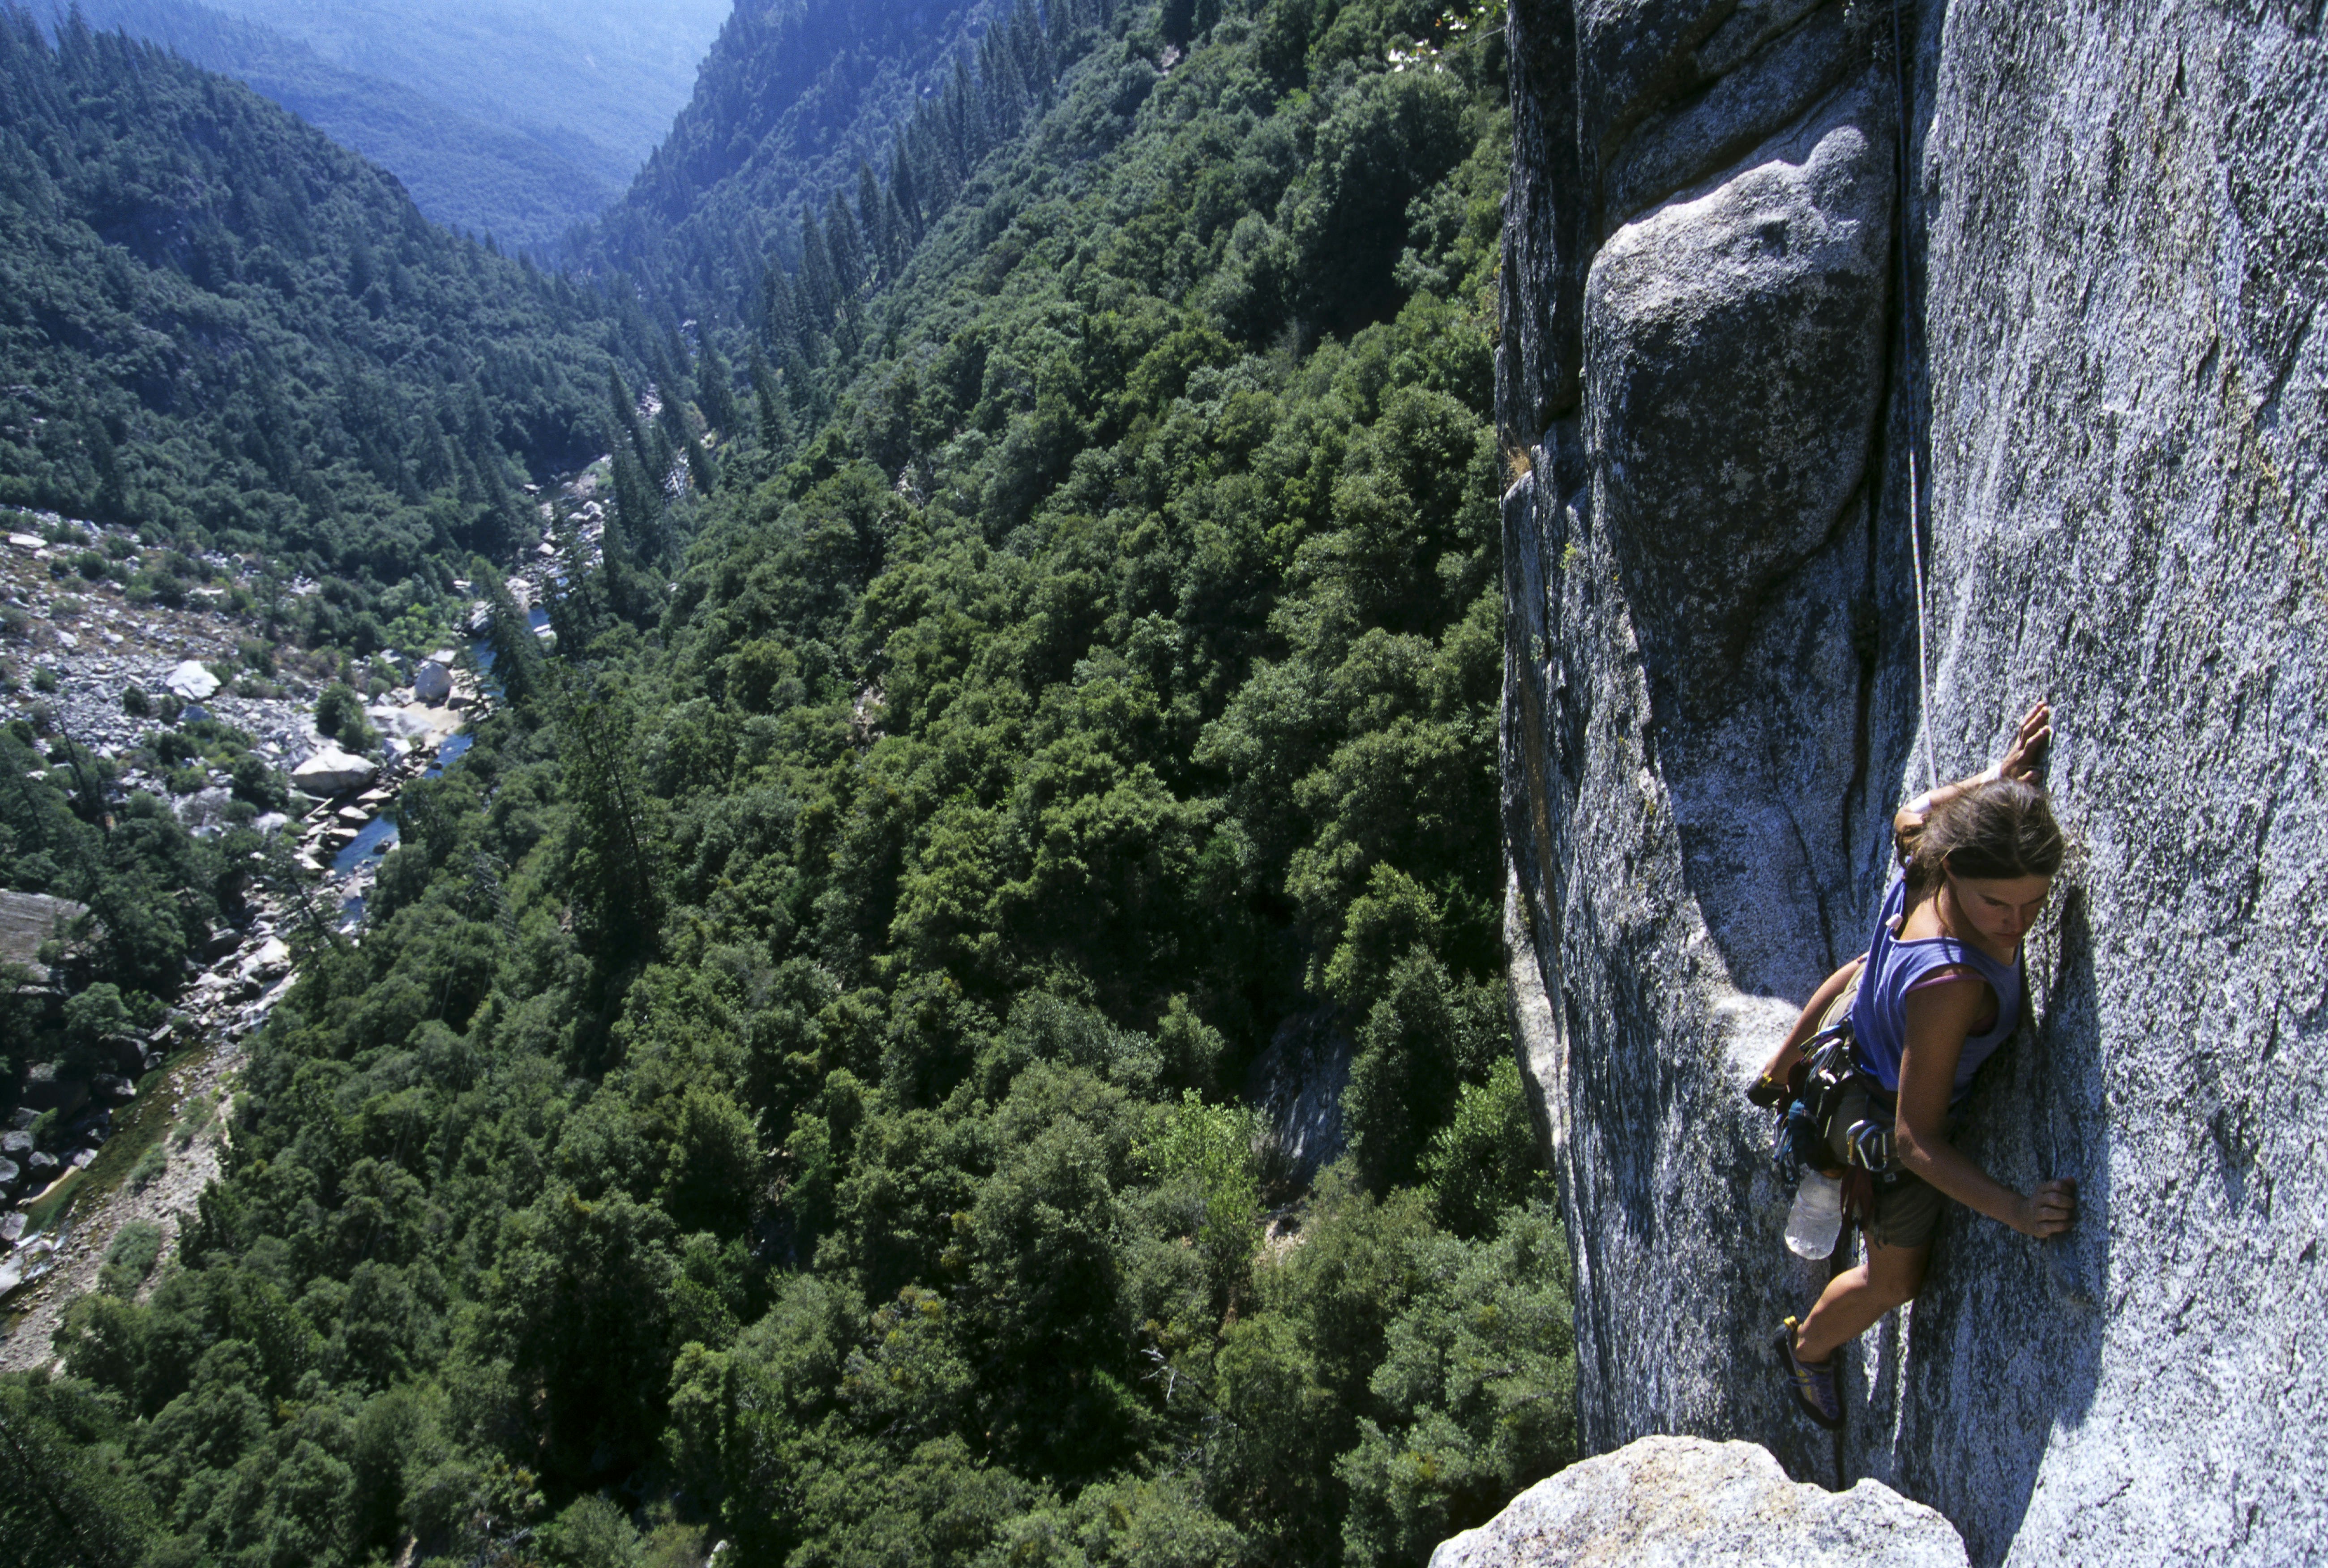 A rock climber clings to the cliff face while tackling an ascent in Yosemite National Park. Below her, a long way down, trees and a river are visible.